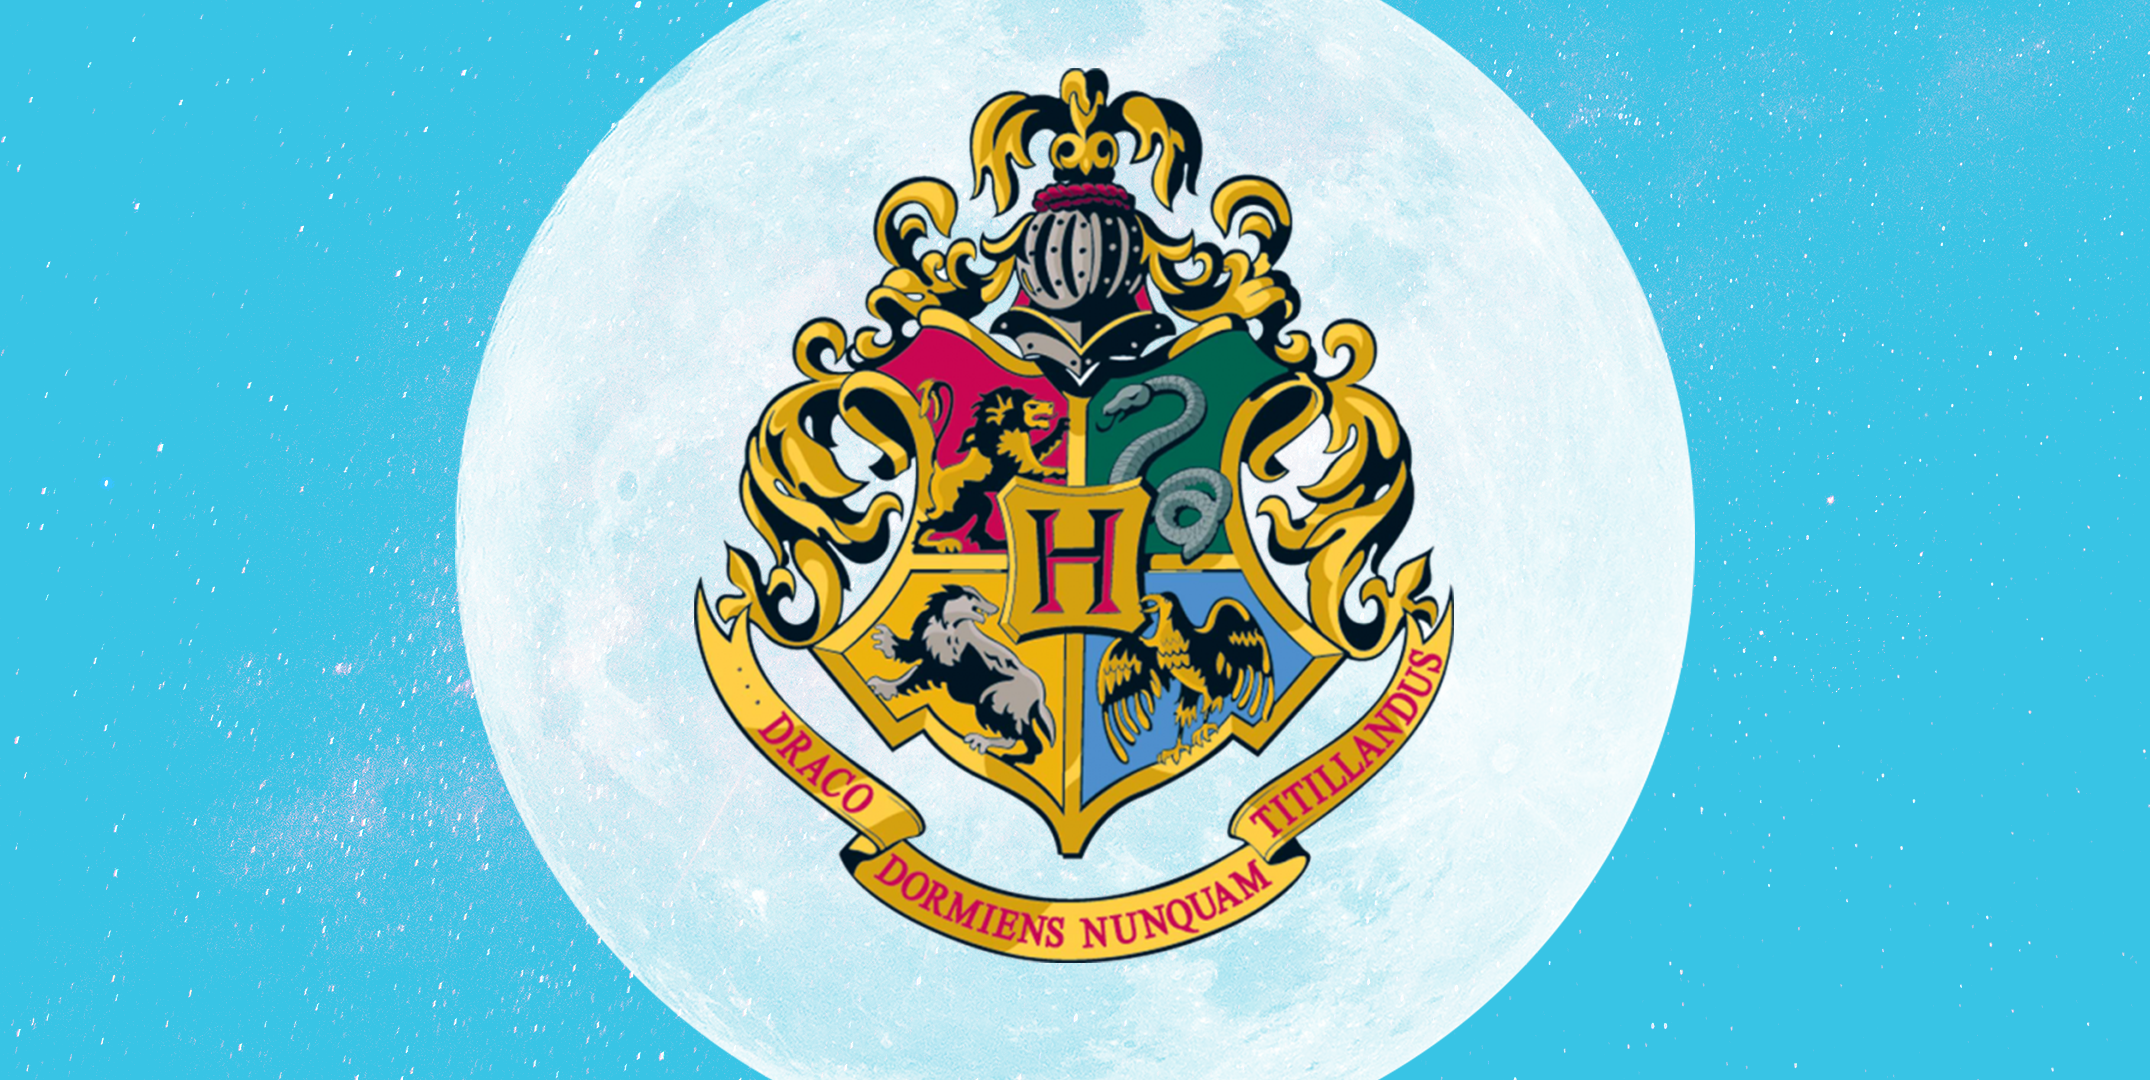 Which Hogwarts House You're in, Based on